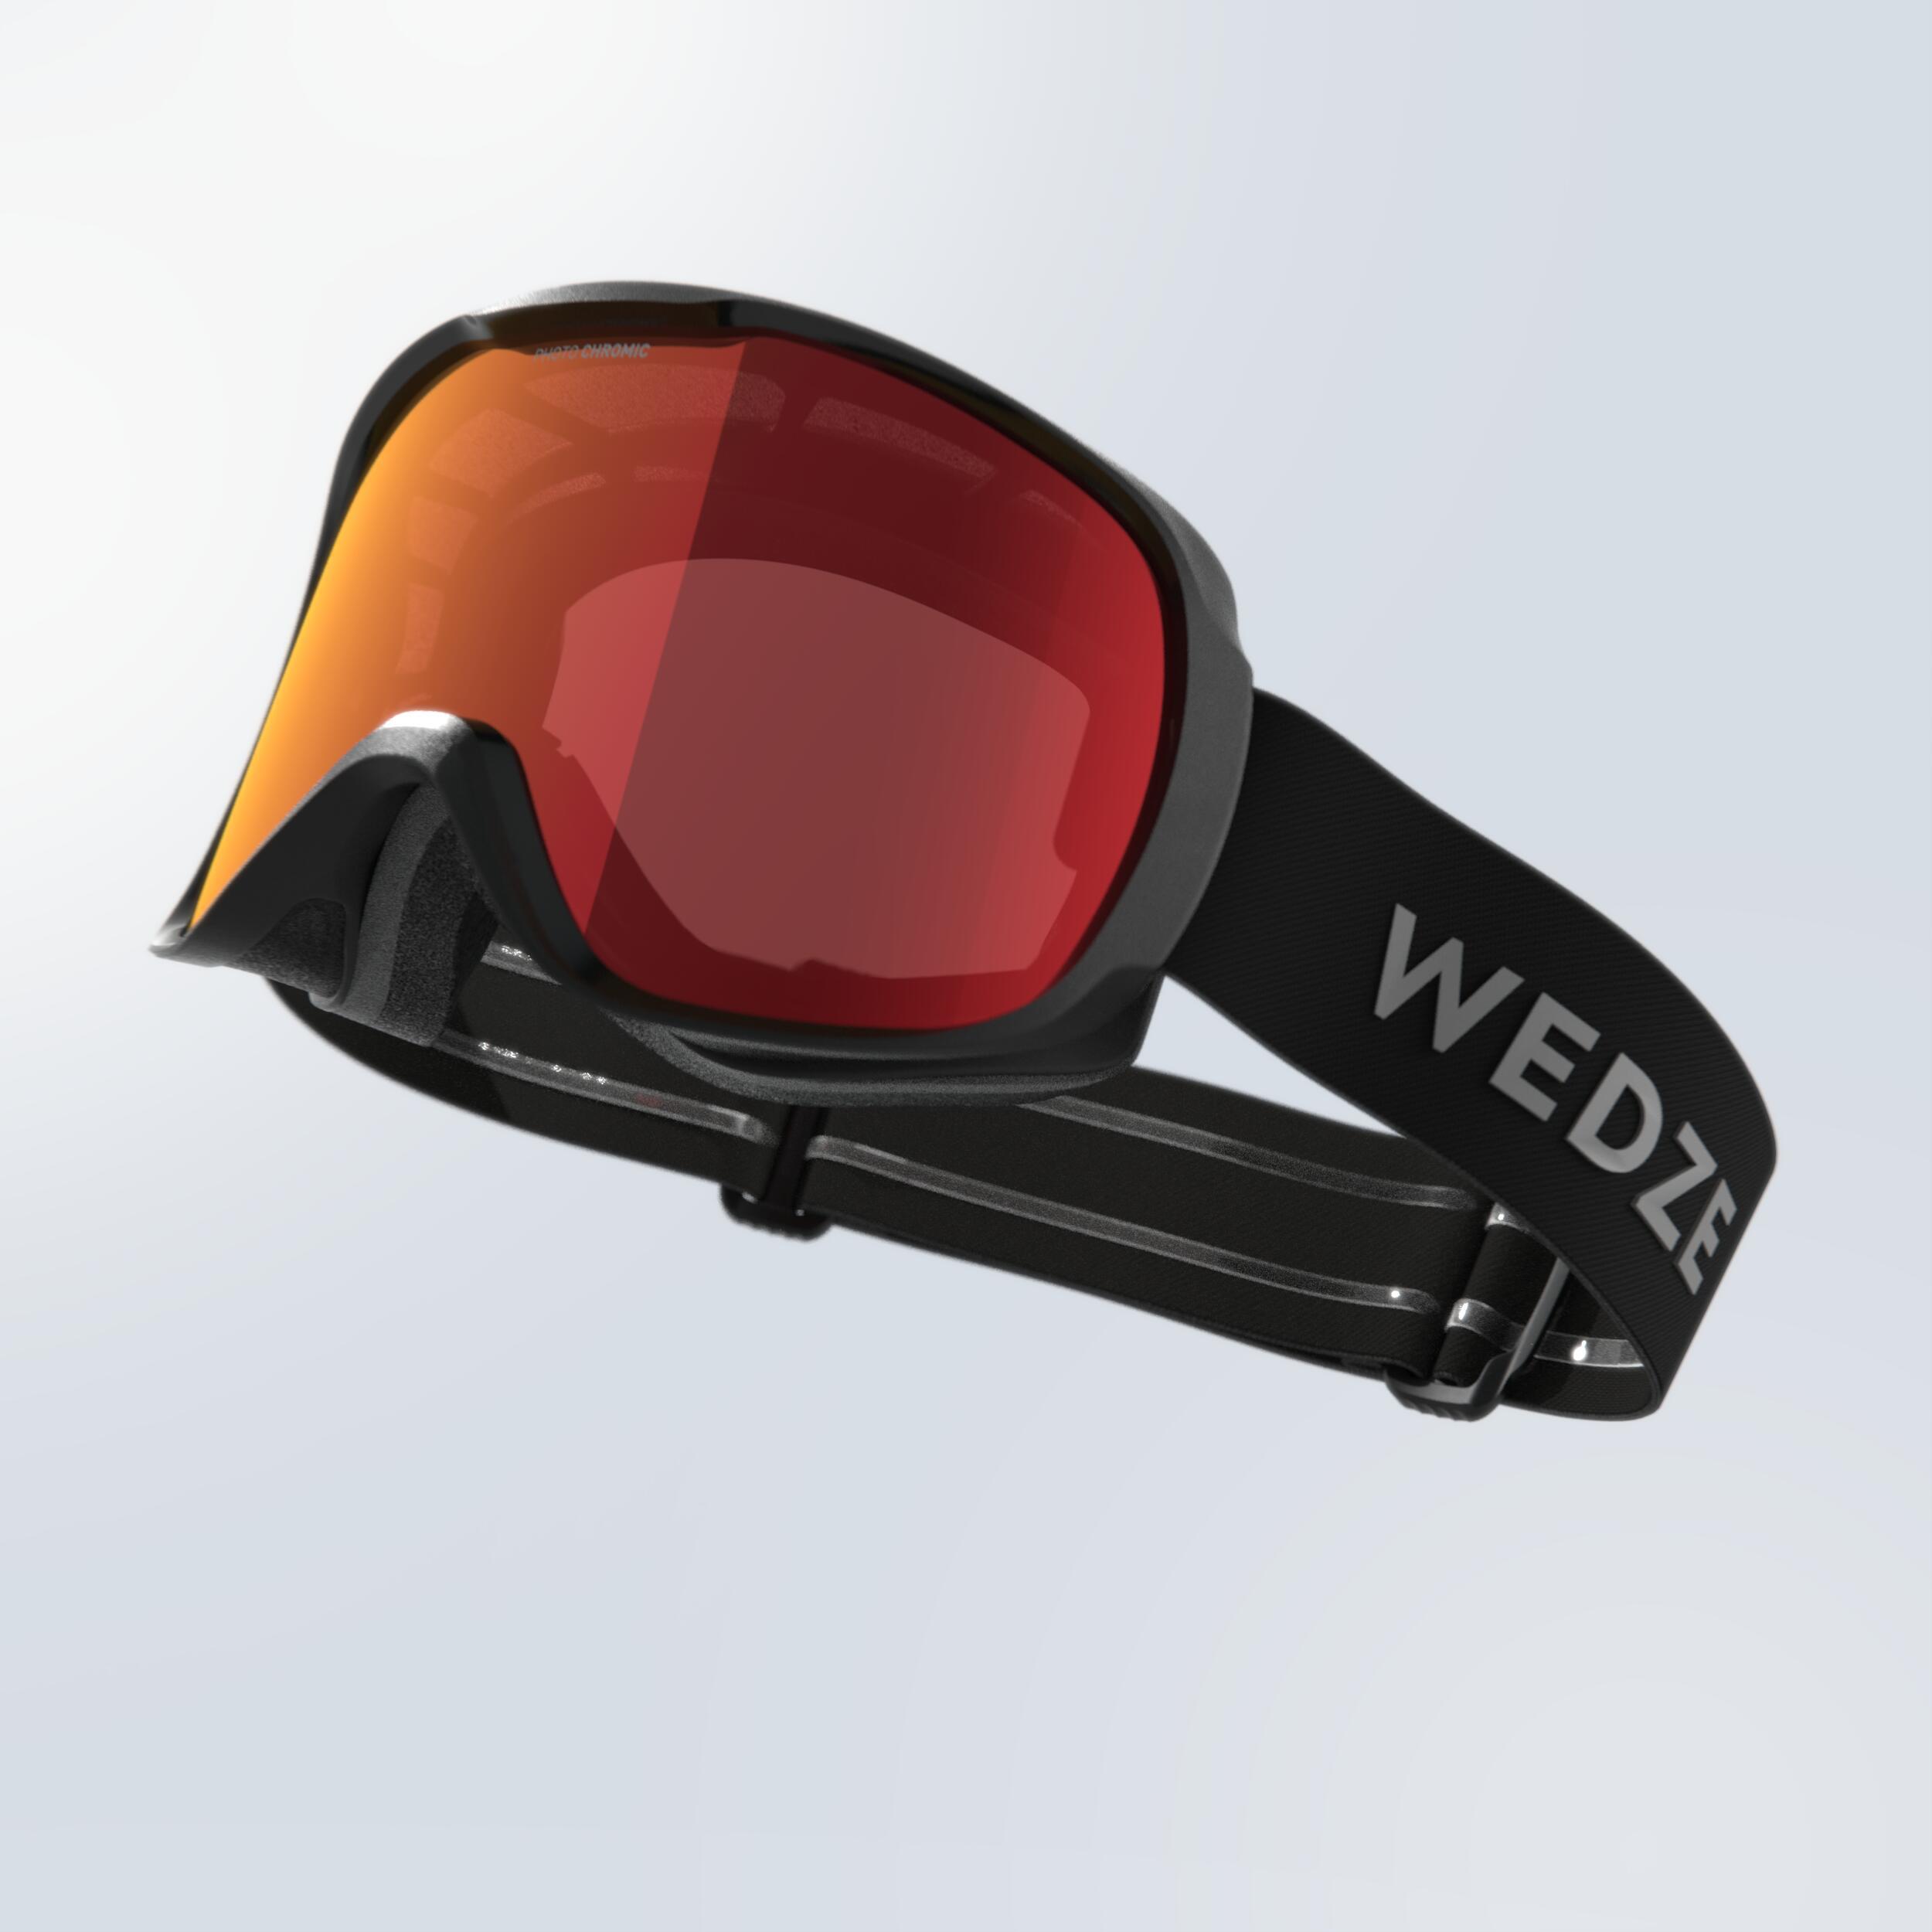 WEDZE KIDS AND ADULT’S ALL-WEATHER SNOWBOARDING  GOGGLES - G 500 PH - BLACK